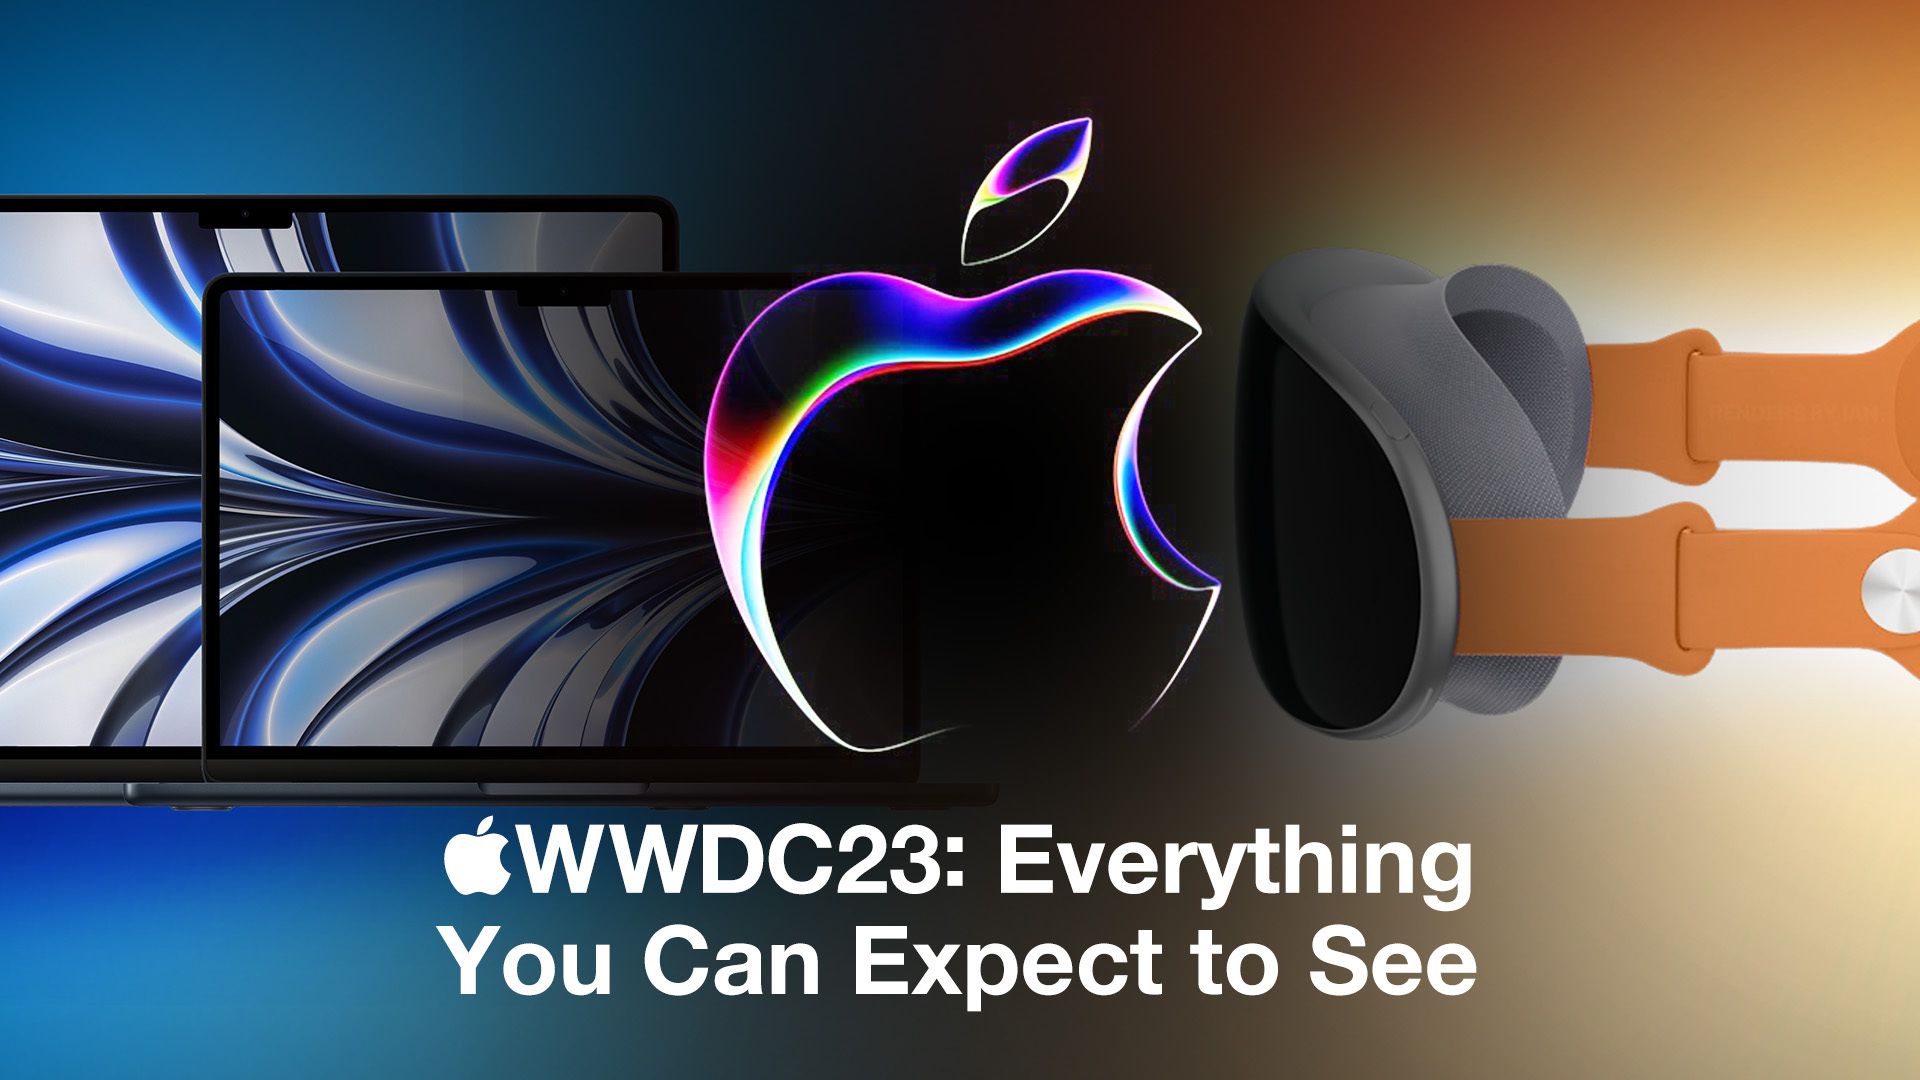 WWDC23 Everything You Can Expect to See Thumb.jpg